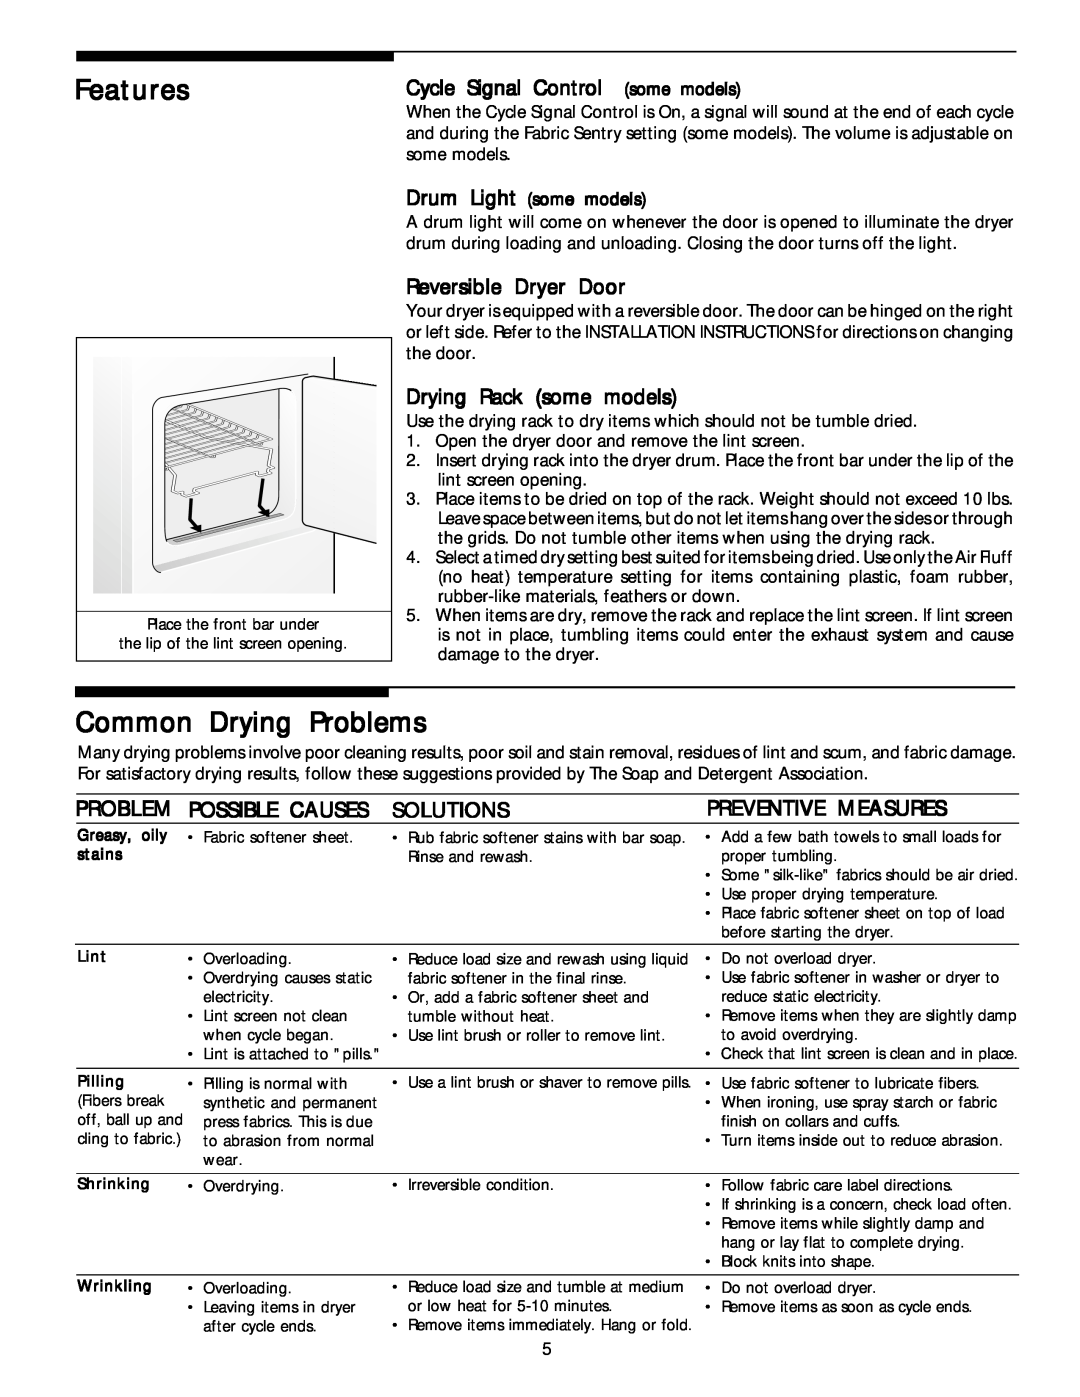 Electrolux - Gibson Stackable Dryer manual Features, Common Drying Problems, Cycle Signal Control some models 